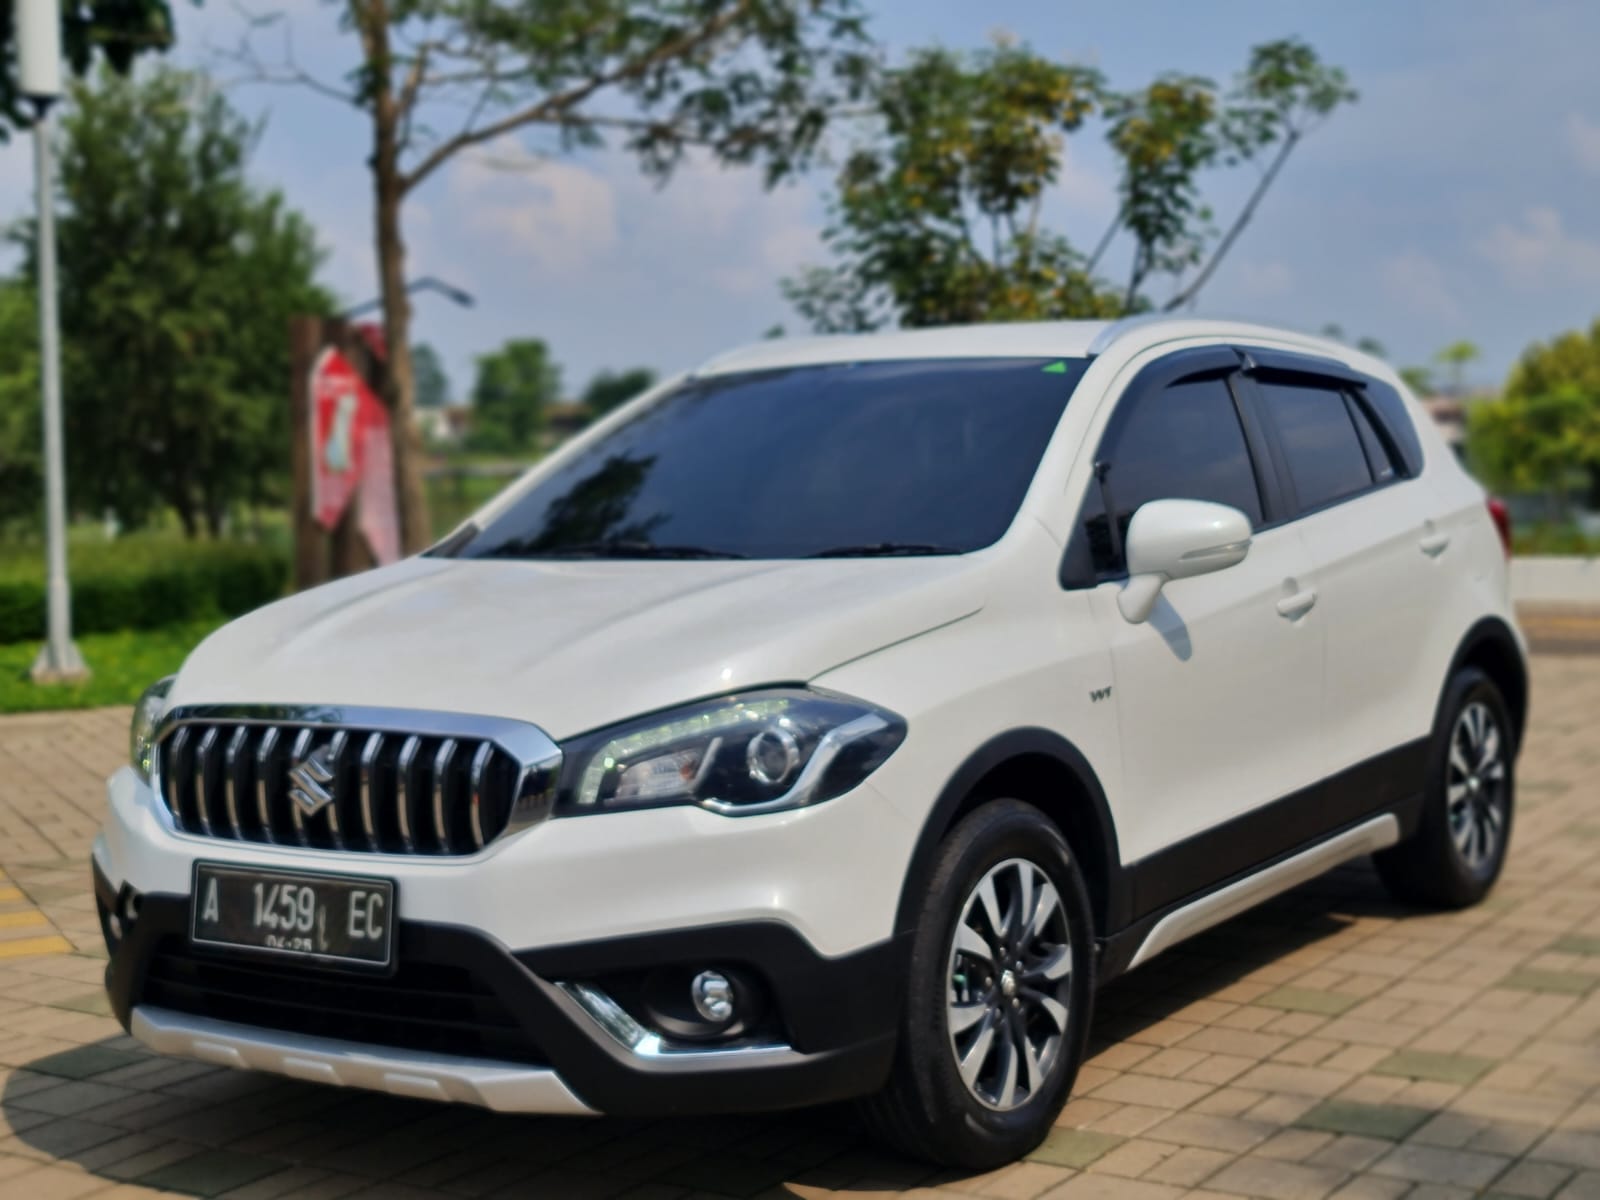 Used 2019 Suzuki SX4 S Cross CROSS ROAD AT CROSS ROAD AT for sale